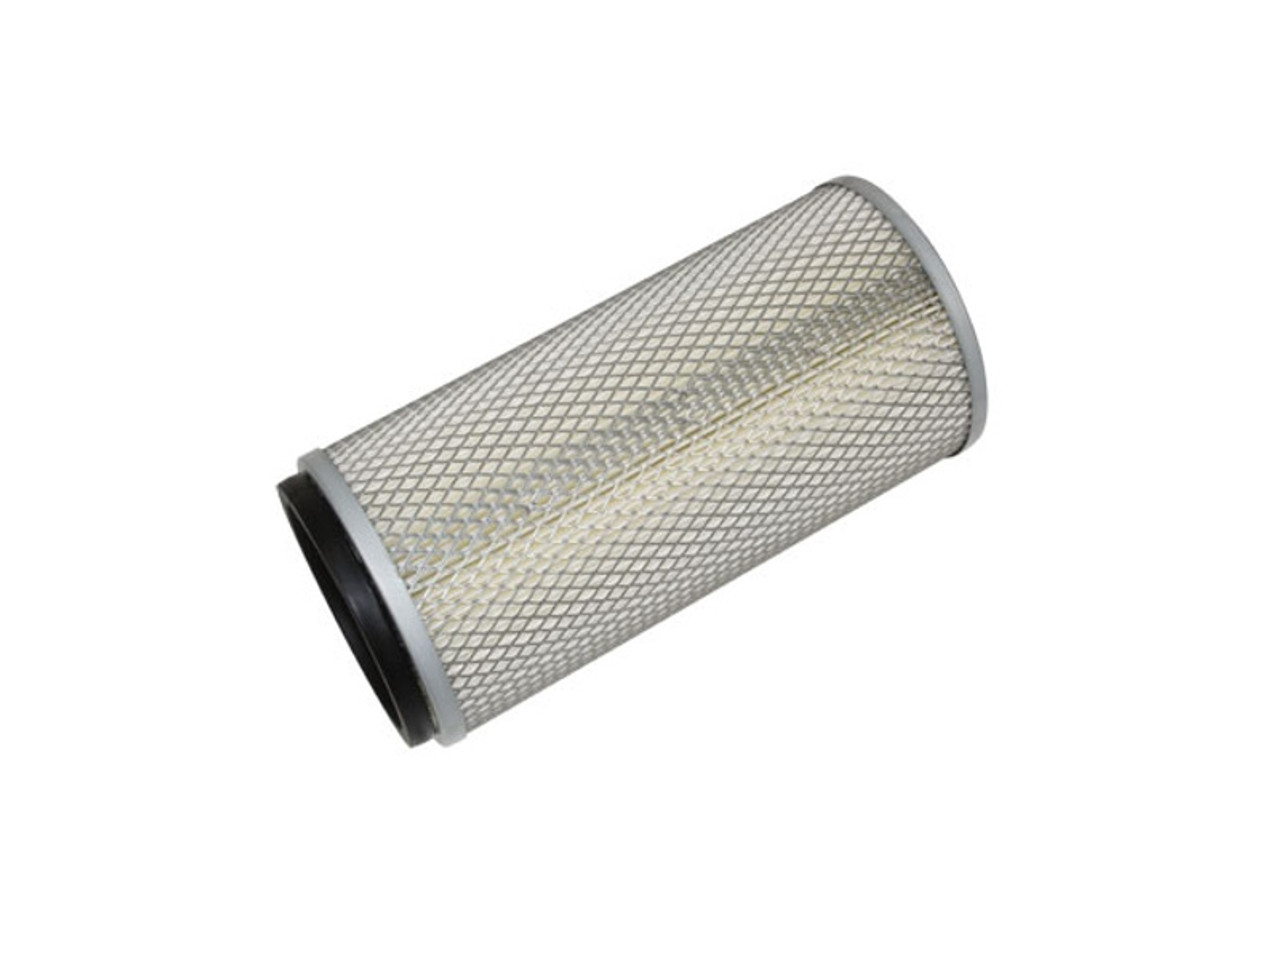 Allmakes 4x4 Discovery 1 and Range Rover Classic VM Air Filter - NTC1435